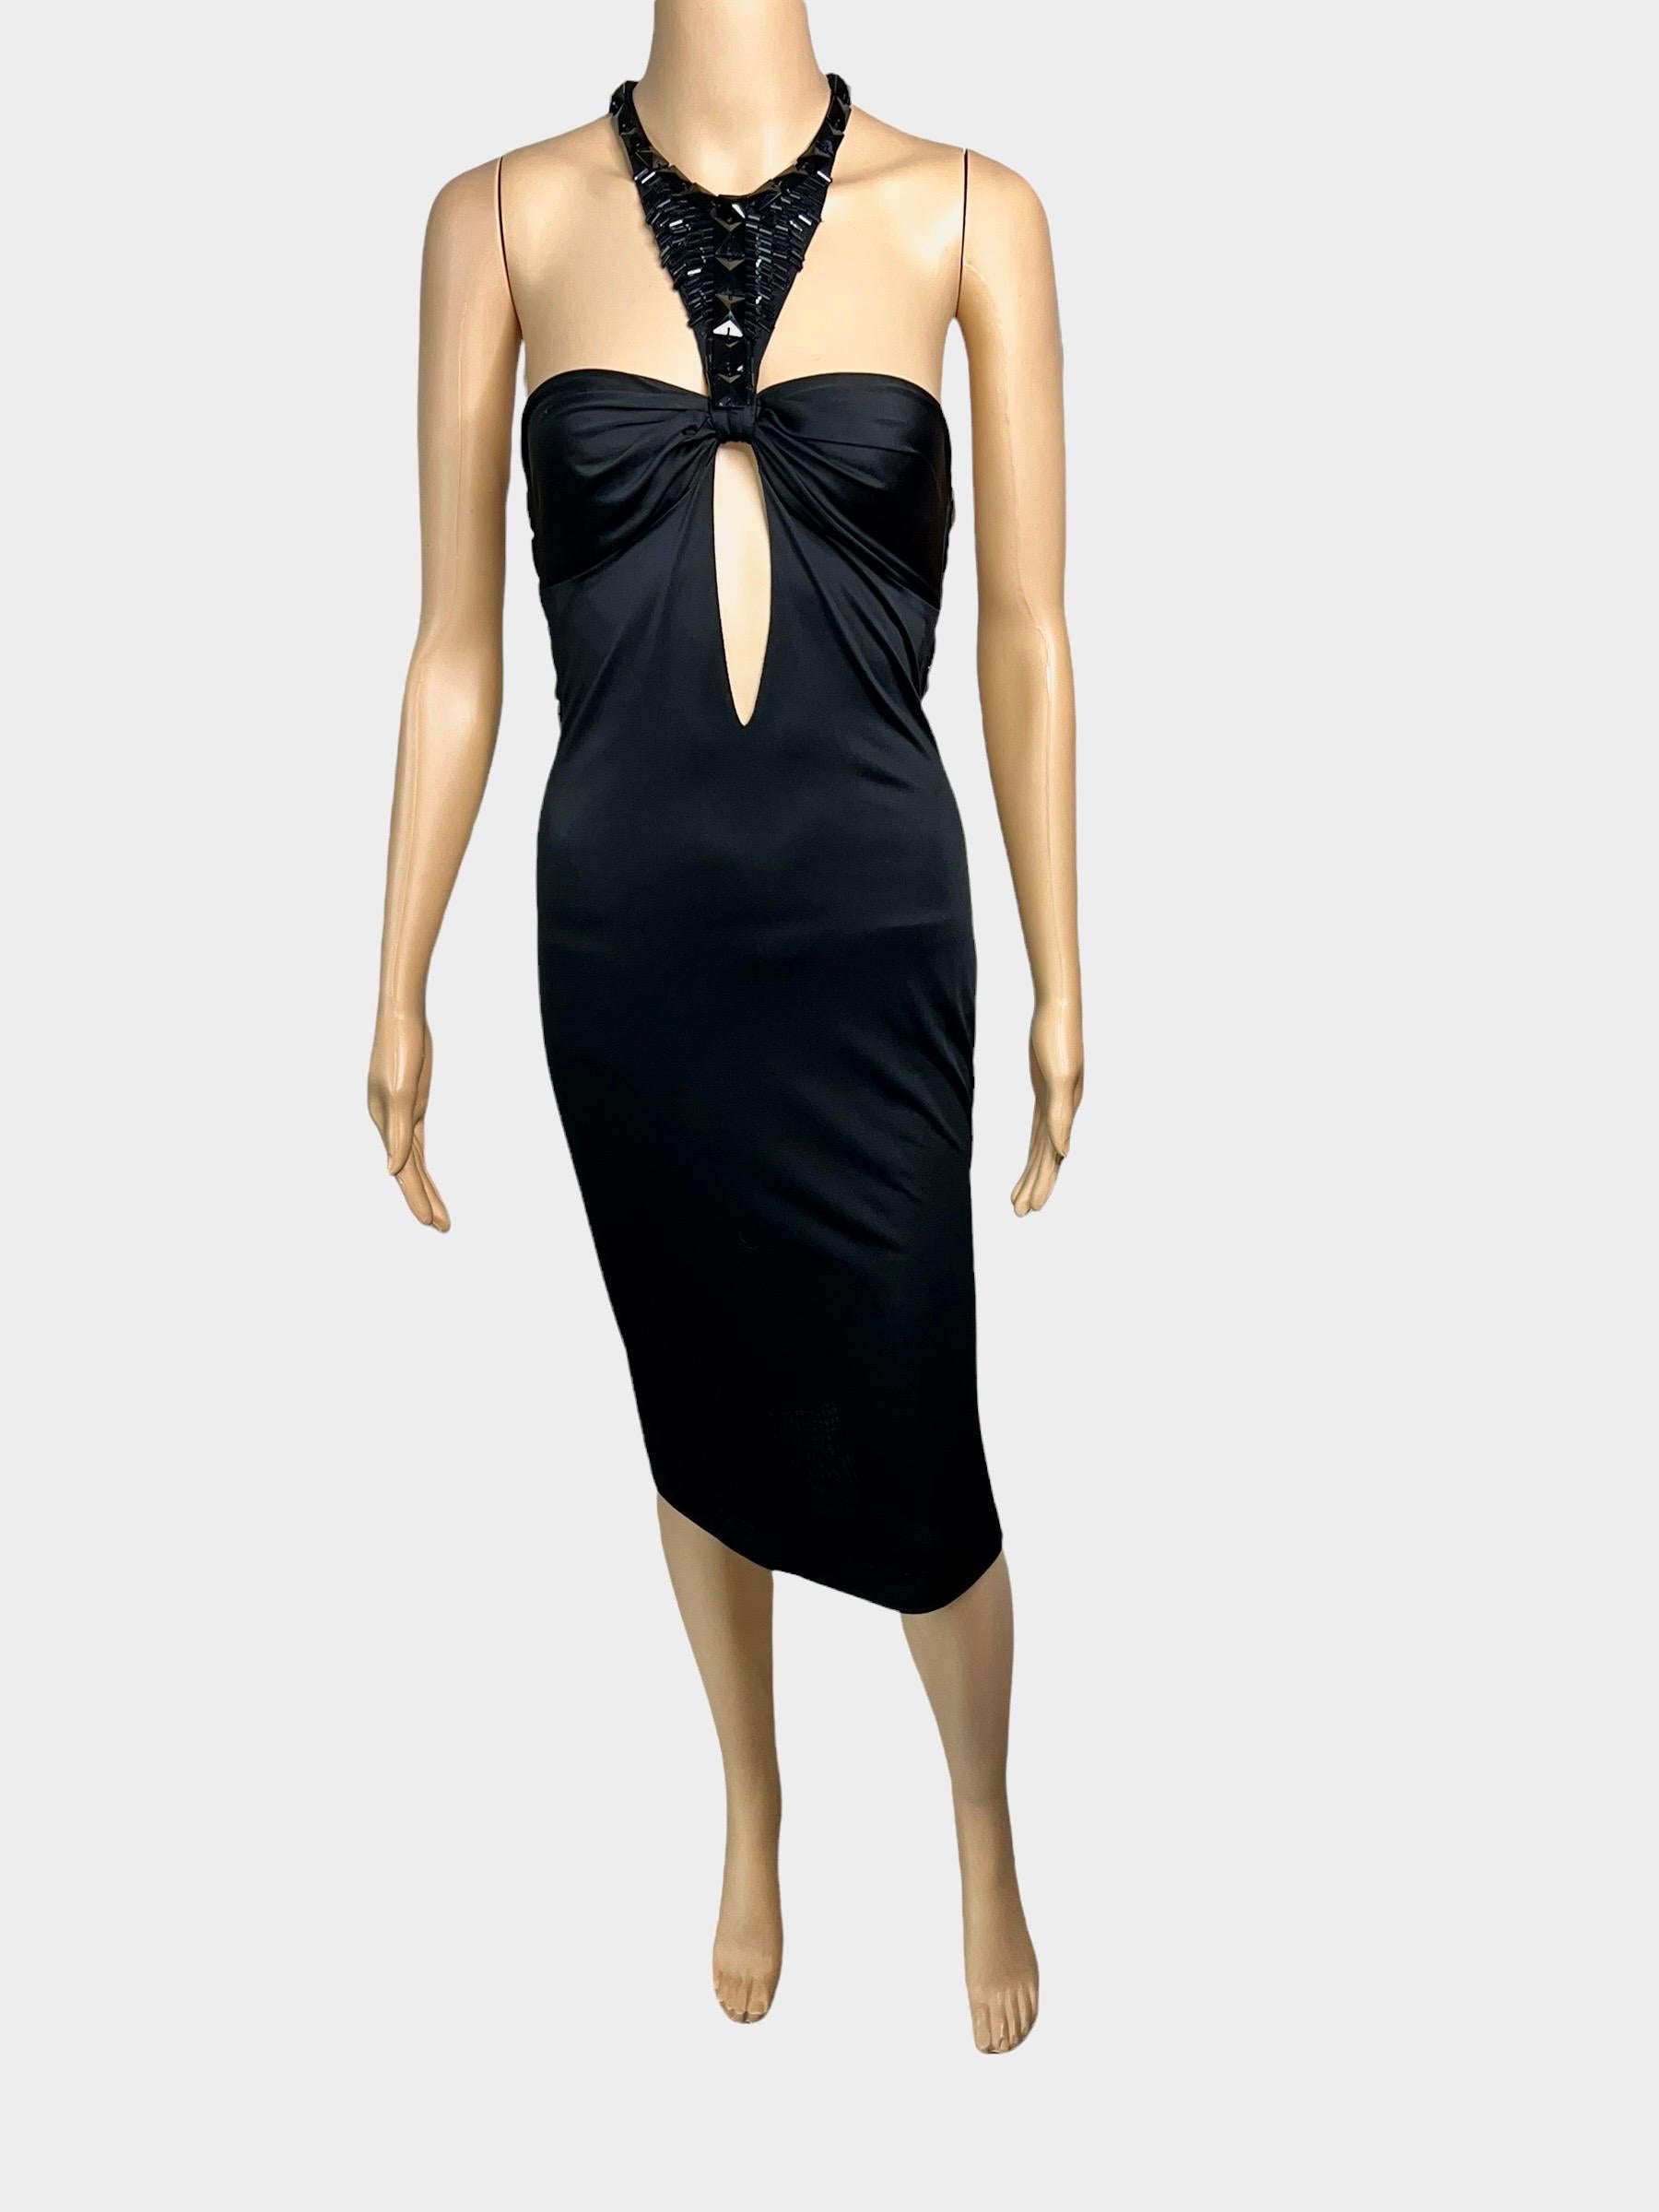 Tom Ford for Gucci F/W 2004 Embellished Plunging Cutout Black Evening Dress  For Sale 5